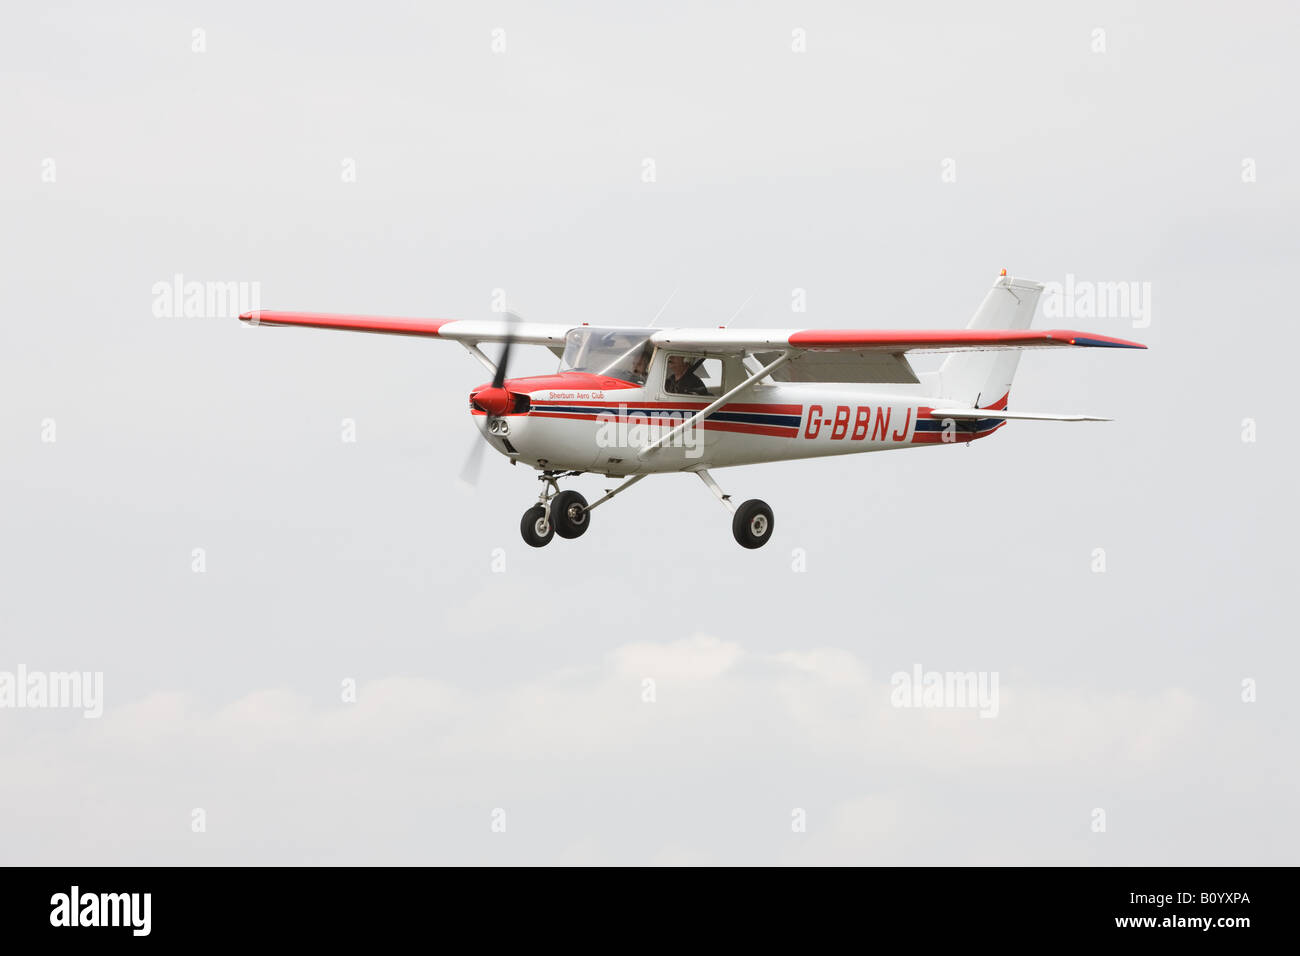 Reims Cessna F150L G-BBNJ on final approach to land @ Sandtoft Airfield Stock Photo